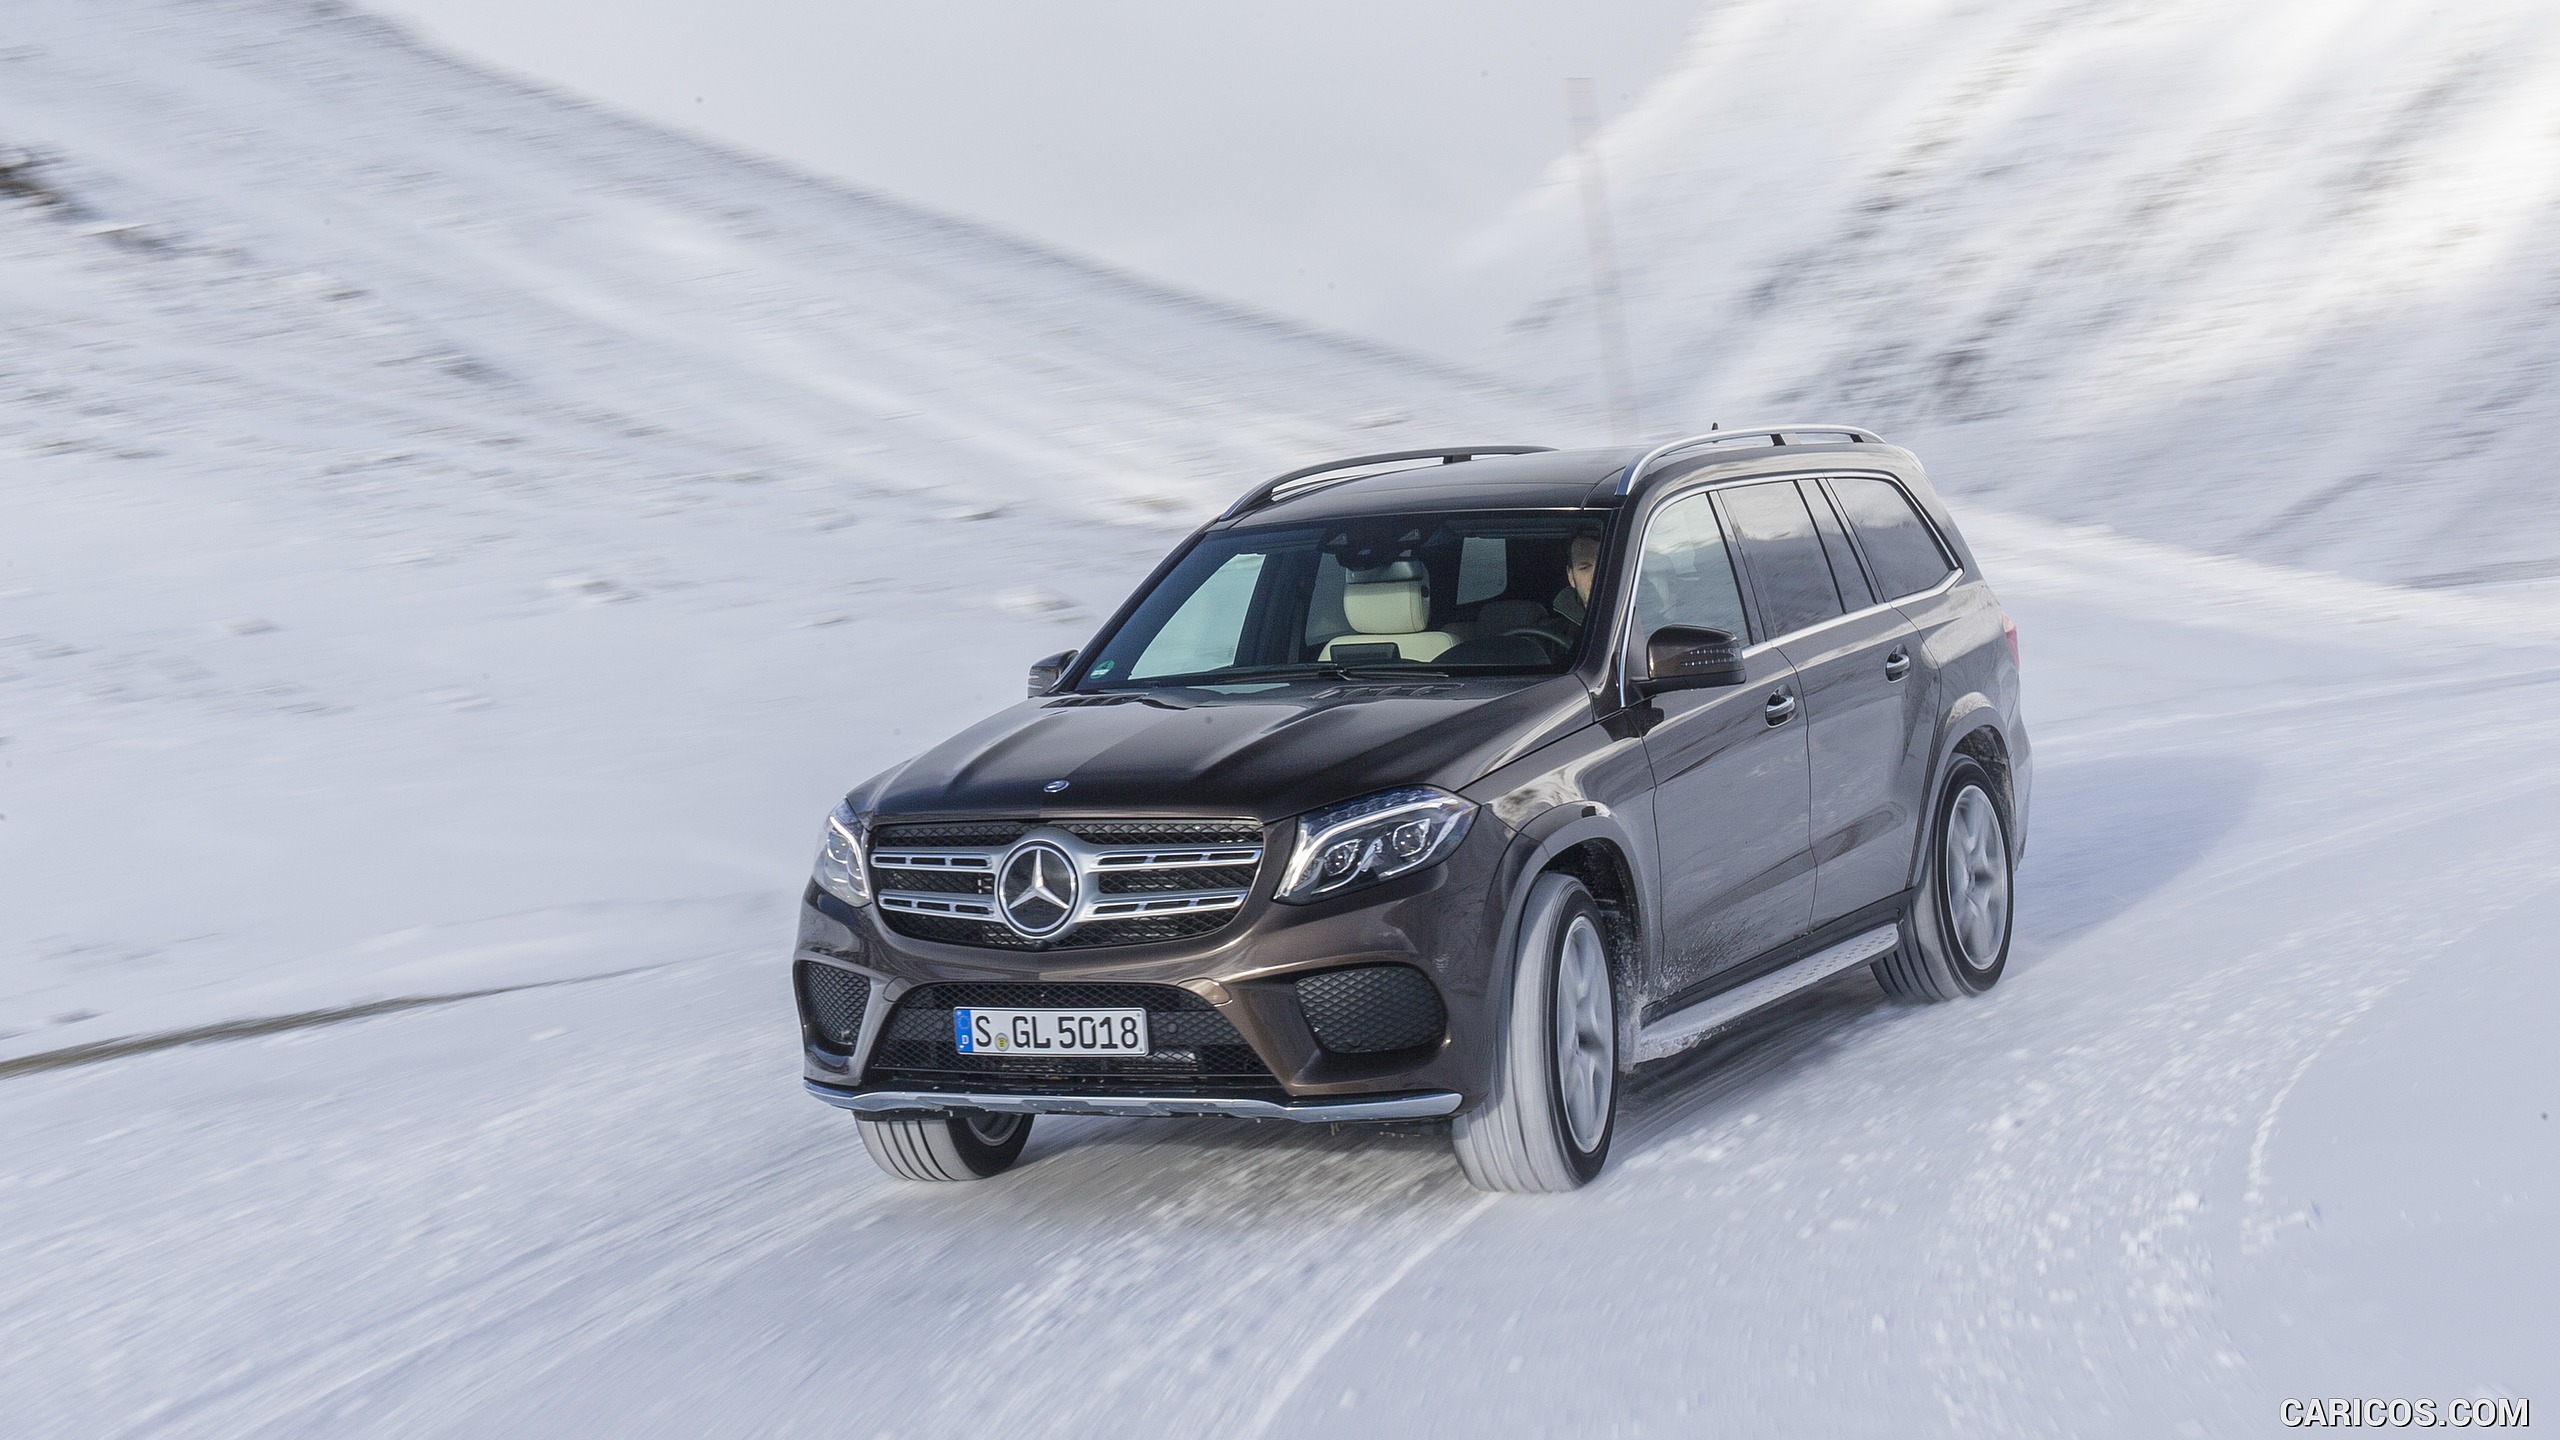 2017 Mercedes-Benz GLS 350d 4MATIC AMG Line in Snow - Front, #181 of 255